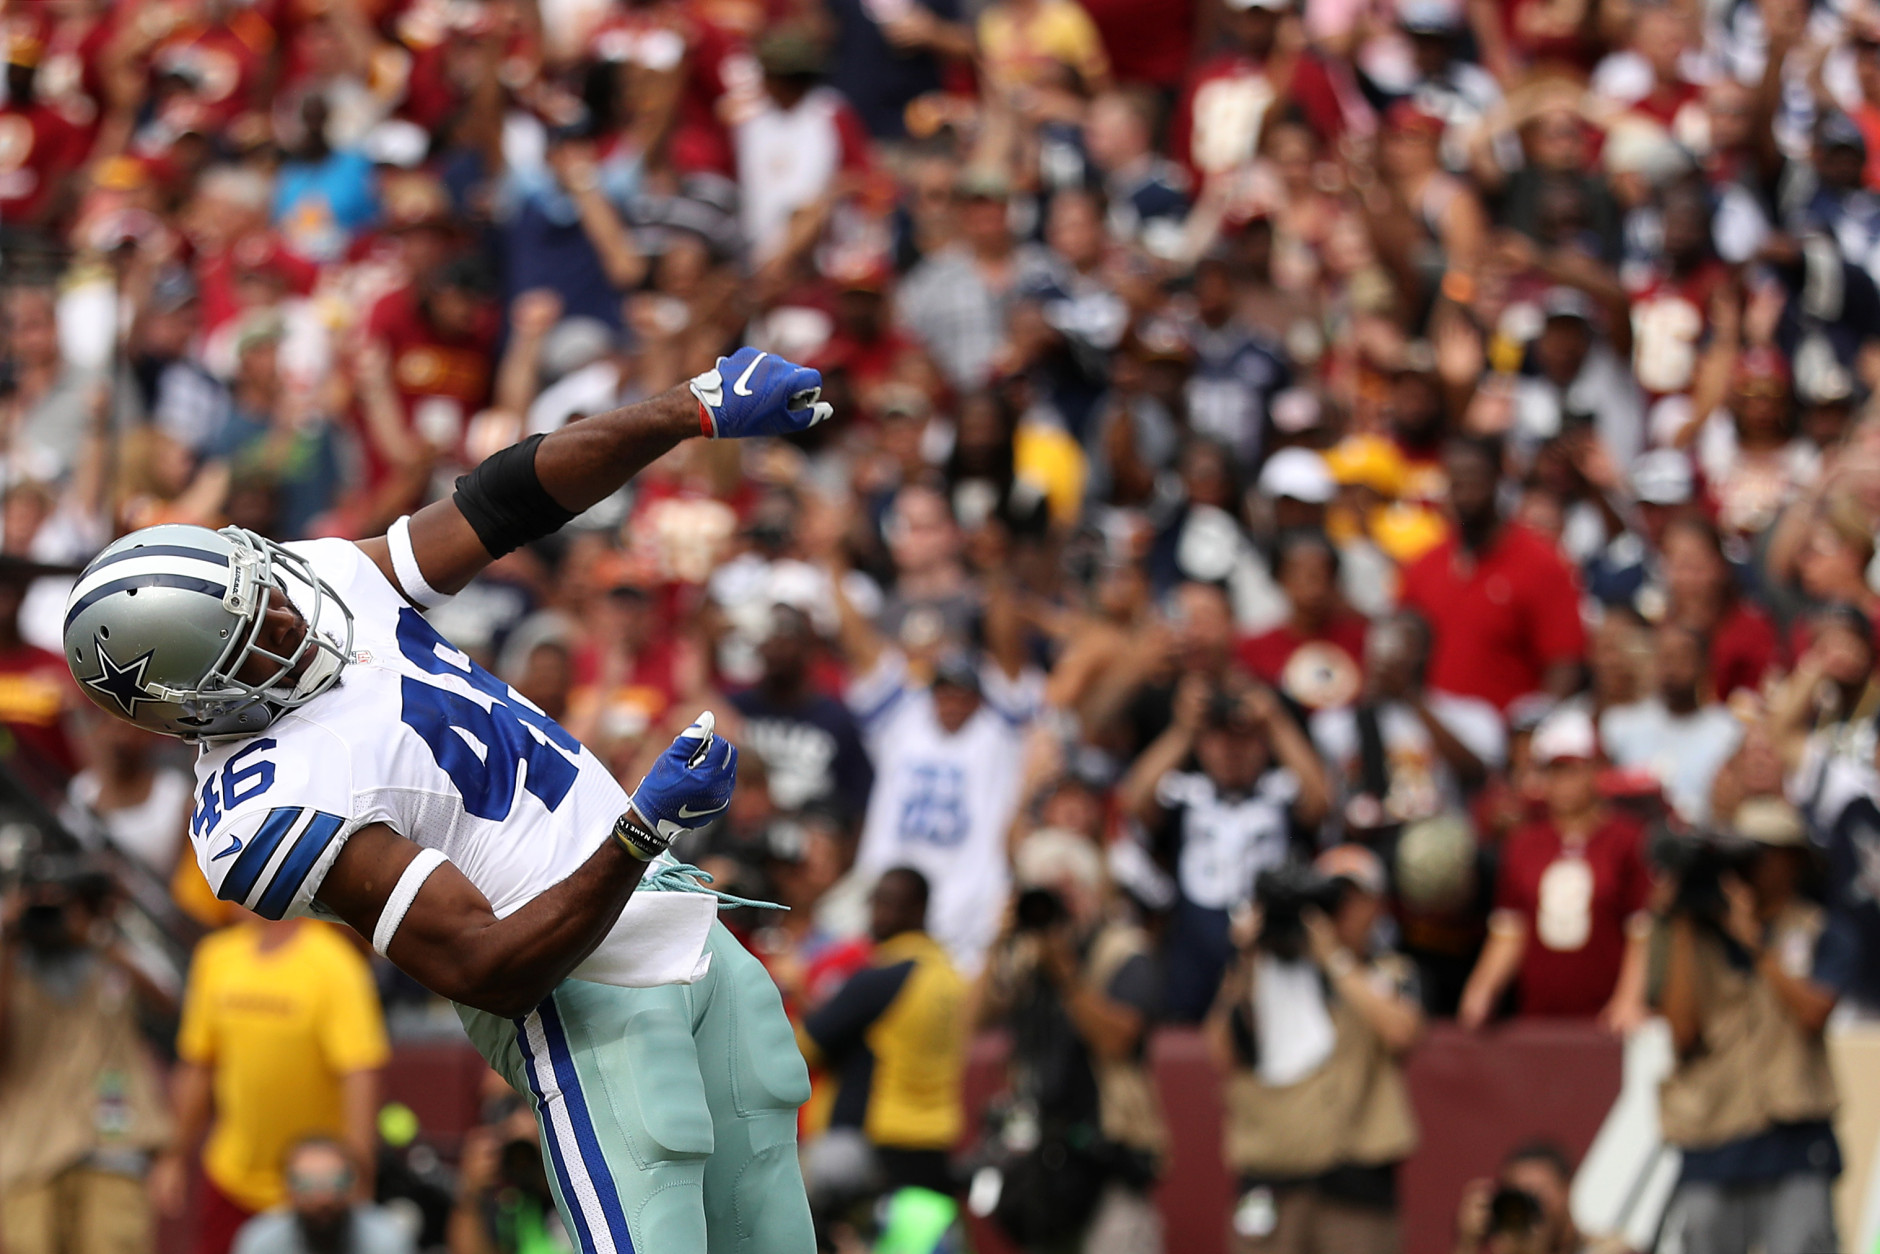 LANDOVER, MD - SEPTEMBER 18: Running back Alfred Morris #46 of the Dallas Cowboys celebrates after scoring a fourth quarter touchdown against the Washington Redskins at FedExField on September 18, 2016 in Landover, Maryland. (Photo by Patrick Smith/Getty Images)